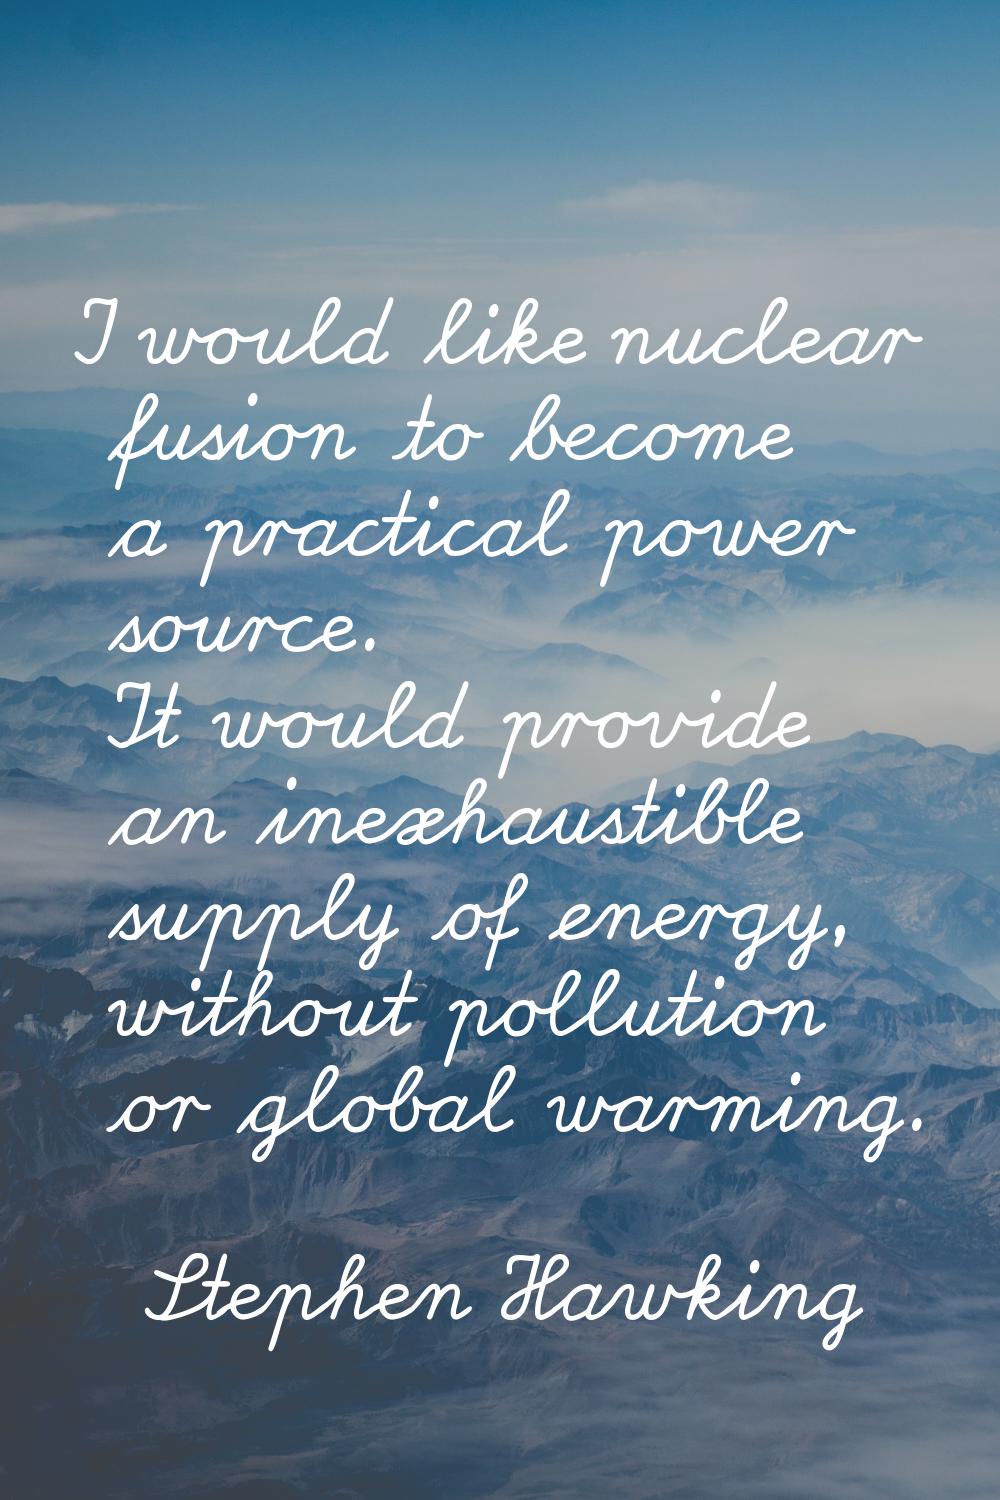 I would like nuclear fusion to become a practical power source. It would provide an inexhaustible s